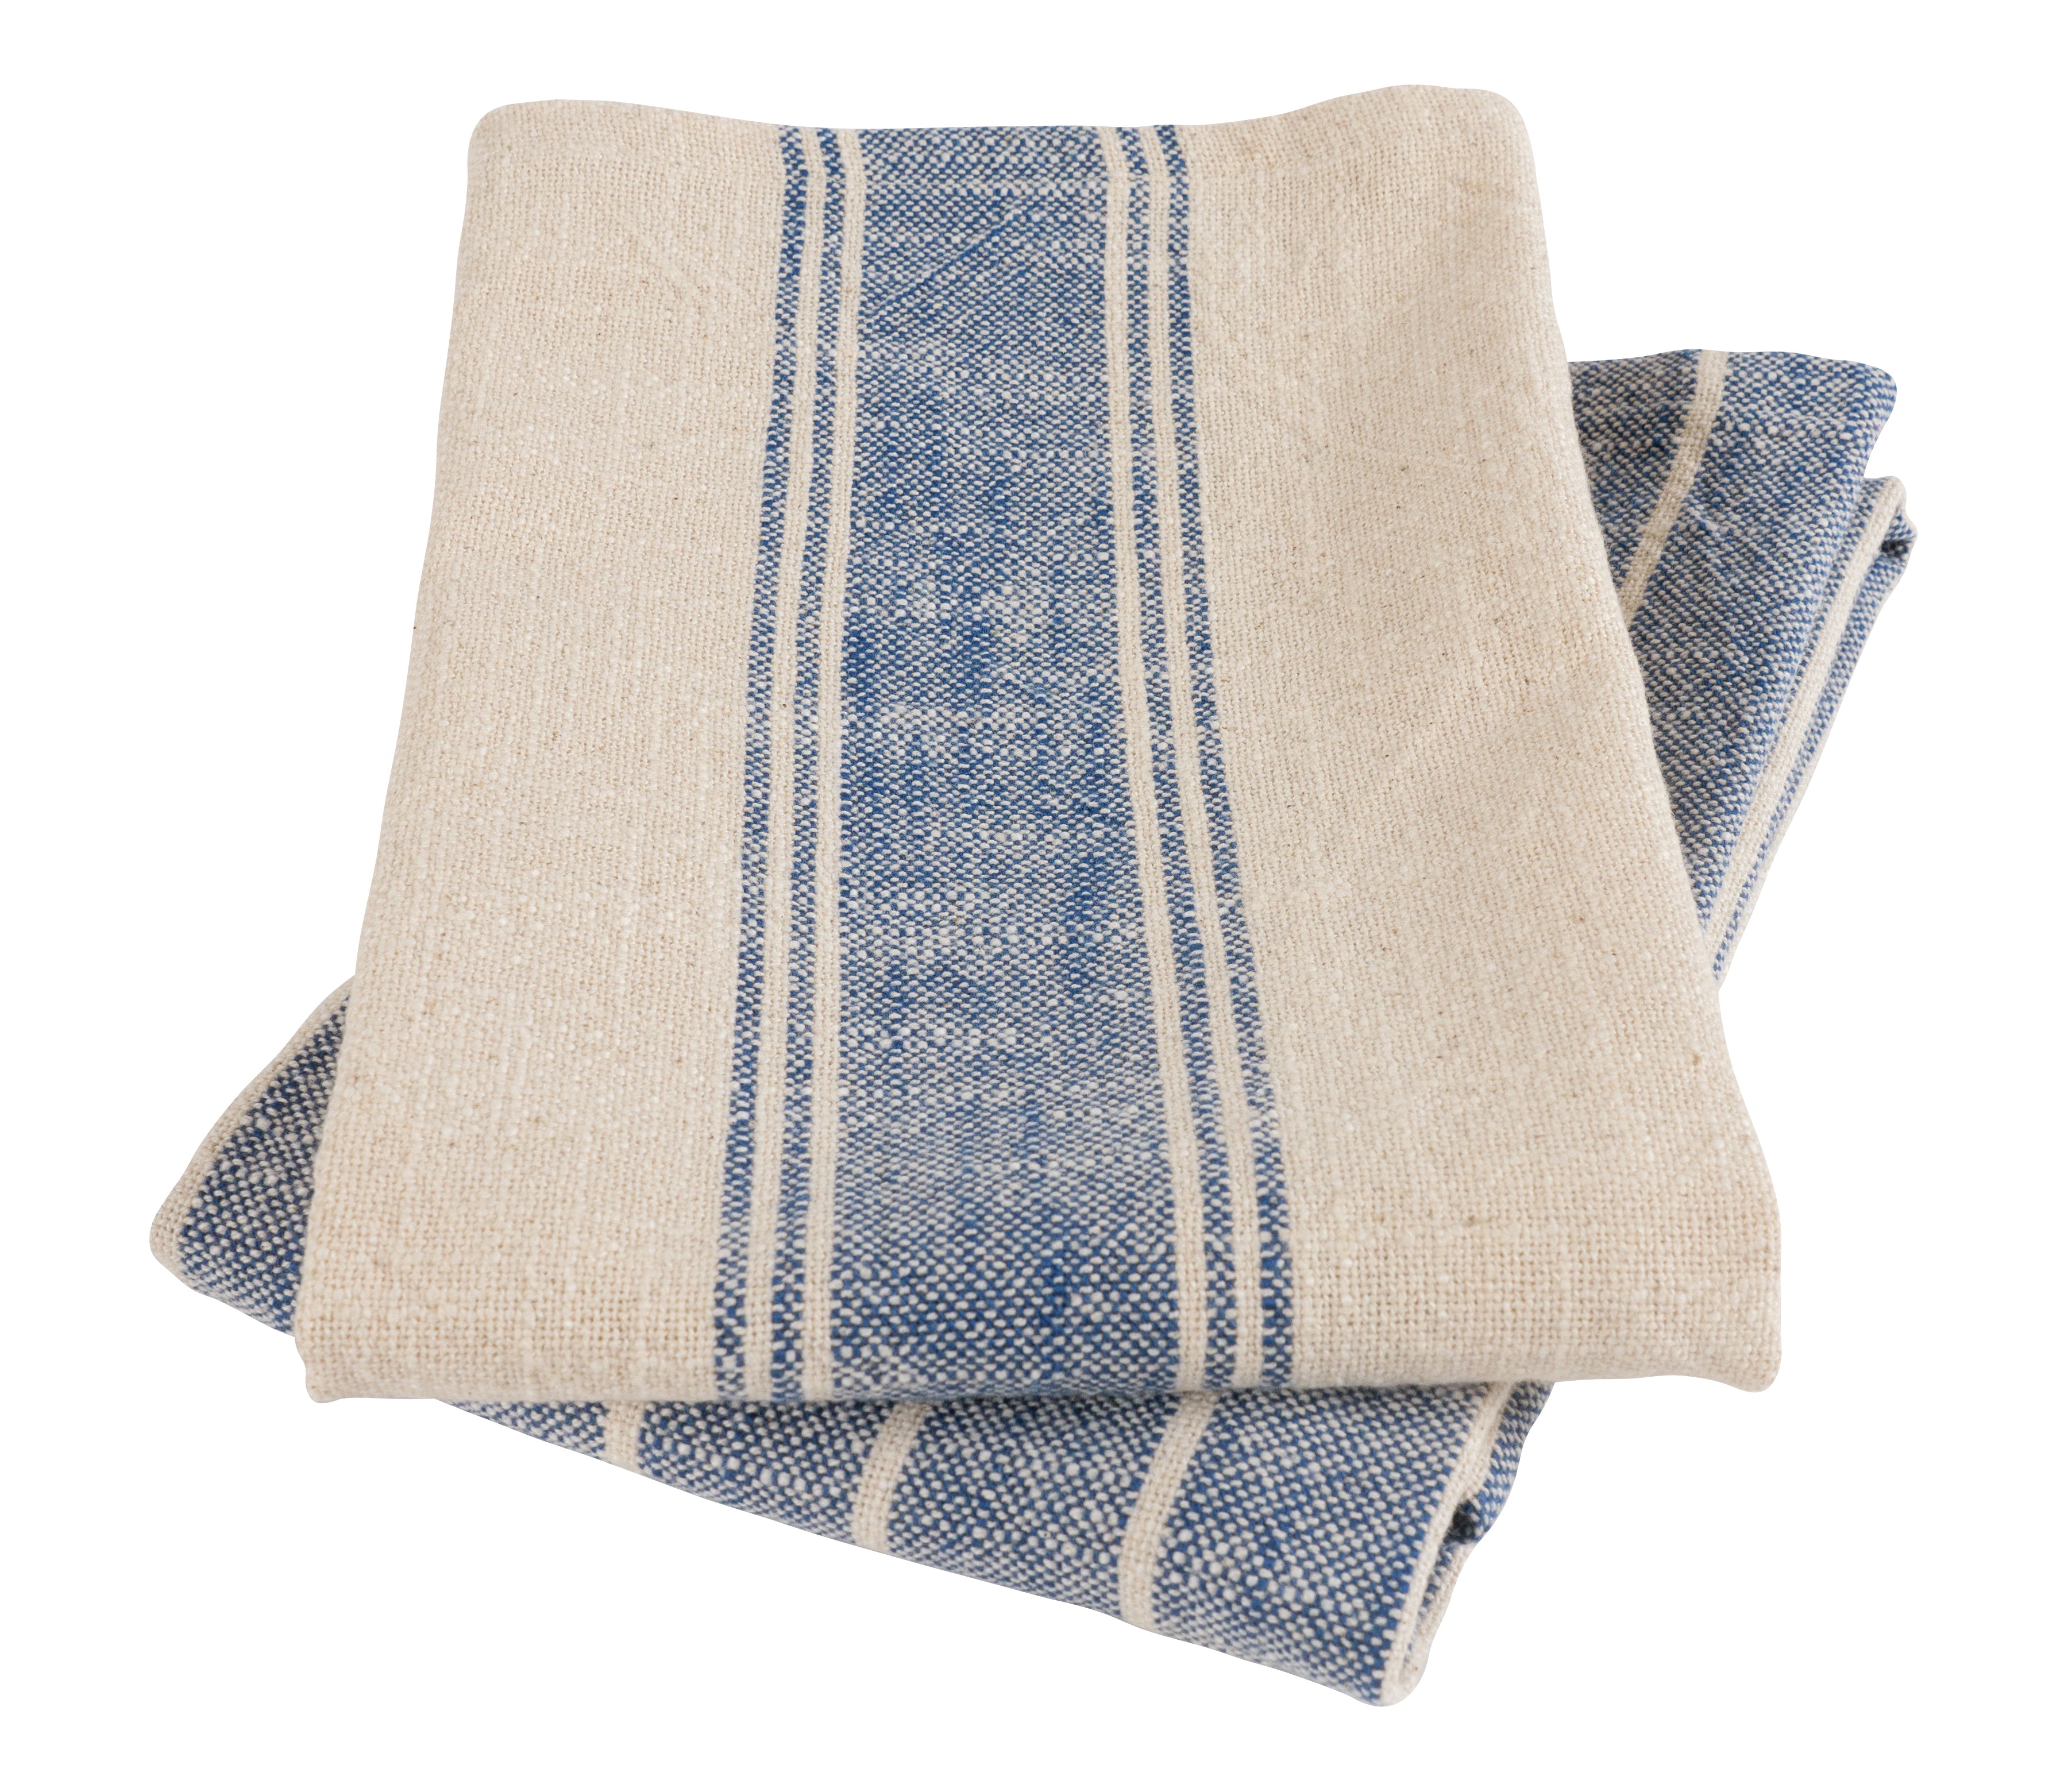 French Style Linen Towels Set of 2, Linen Kitchen Towels With Loop, Thick  Linen Hand Towels, Rustic Linen Tea Towels in Various Colors. 